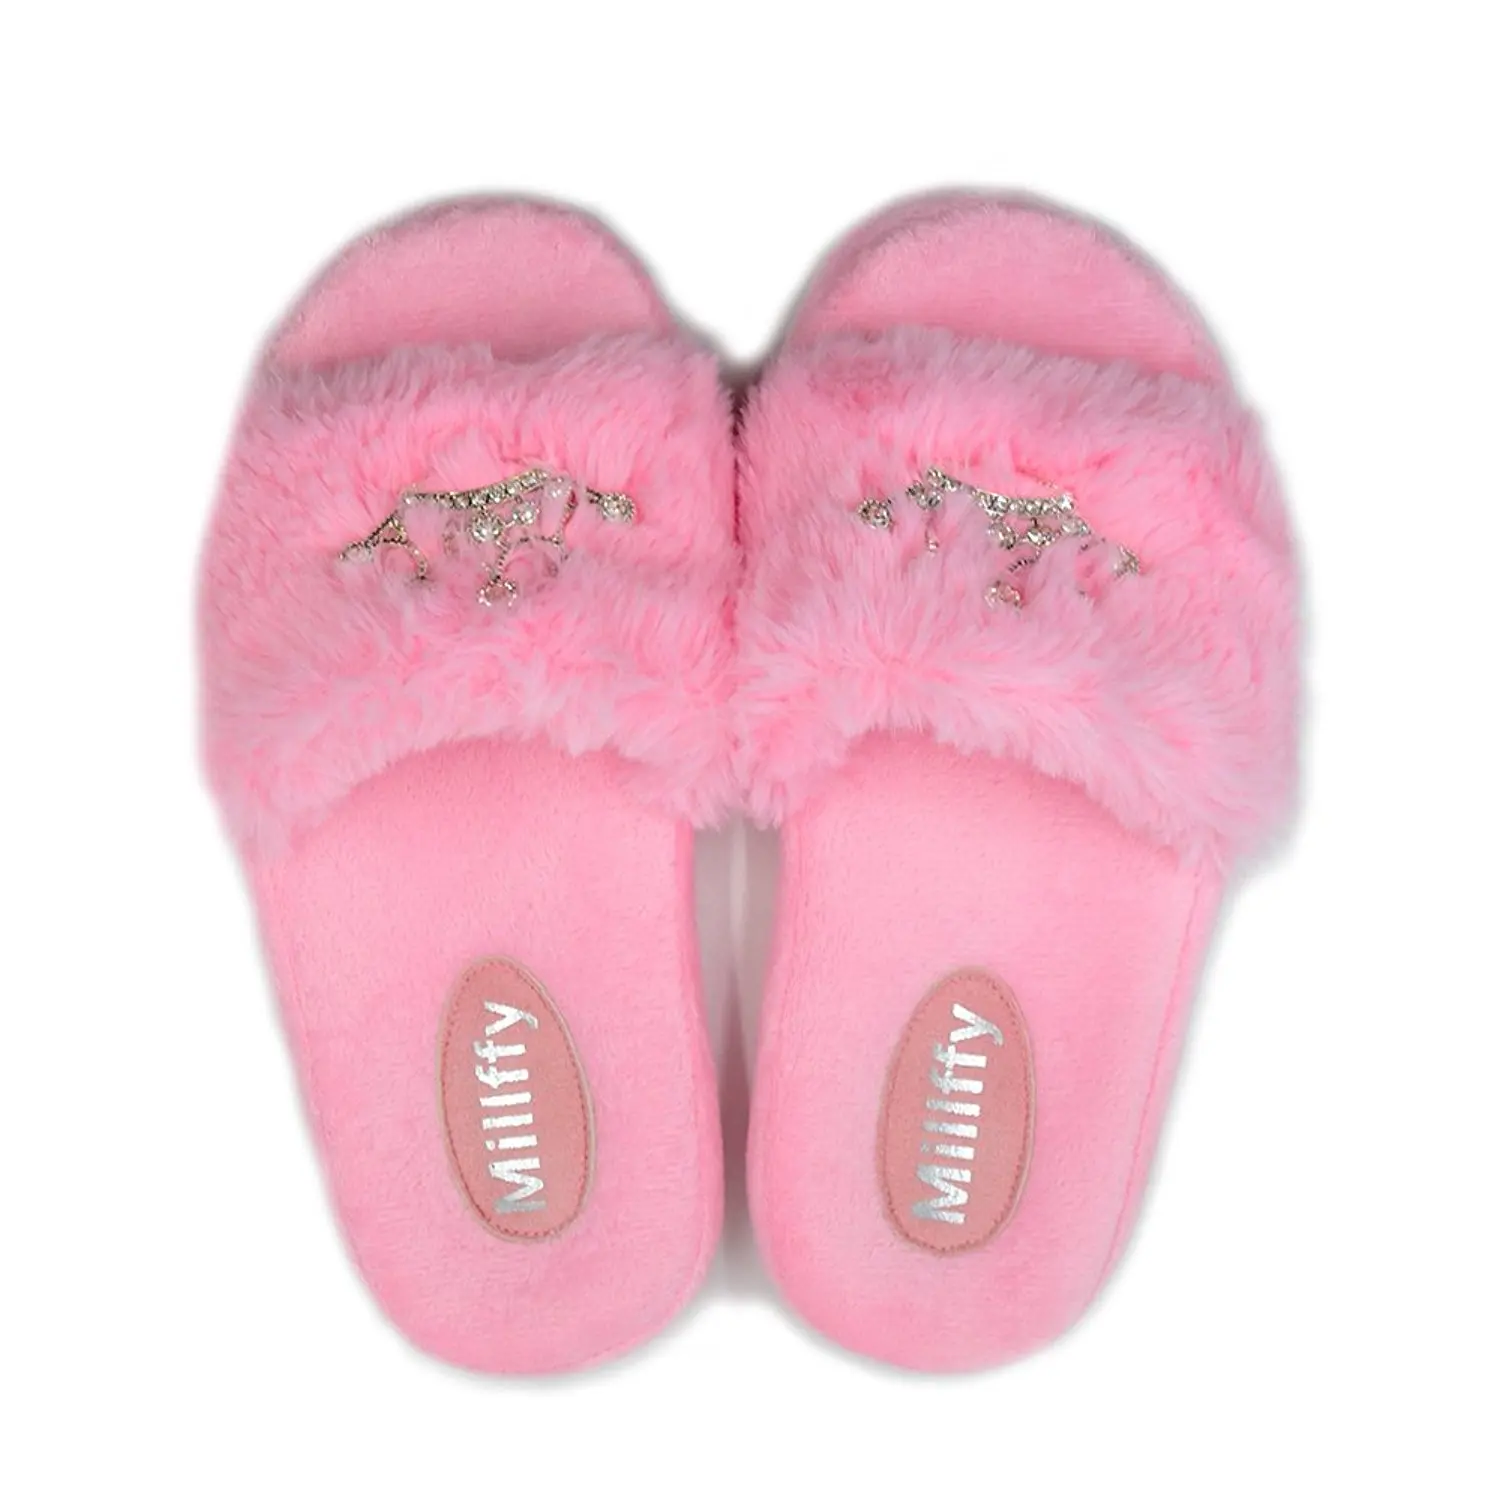 Cheap Fluffy Pink Slippers, find Fluffy Pink Slippers deals on line at ...